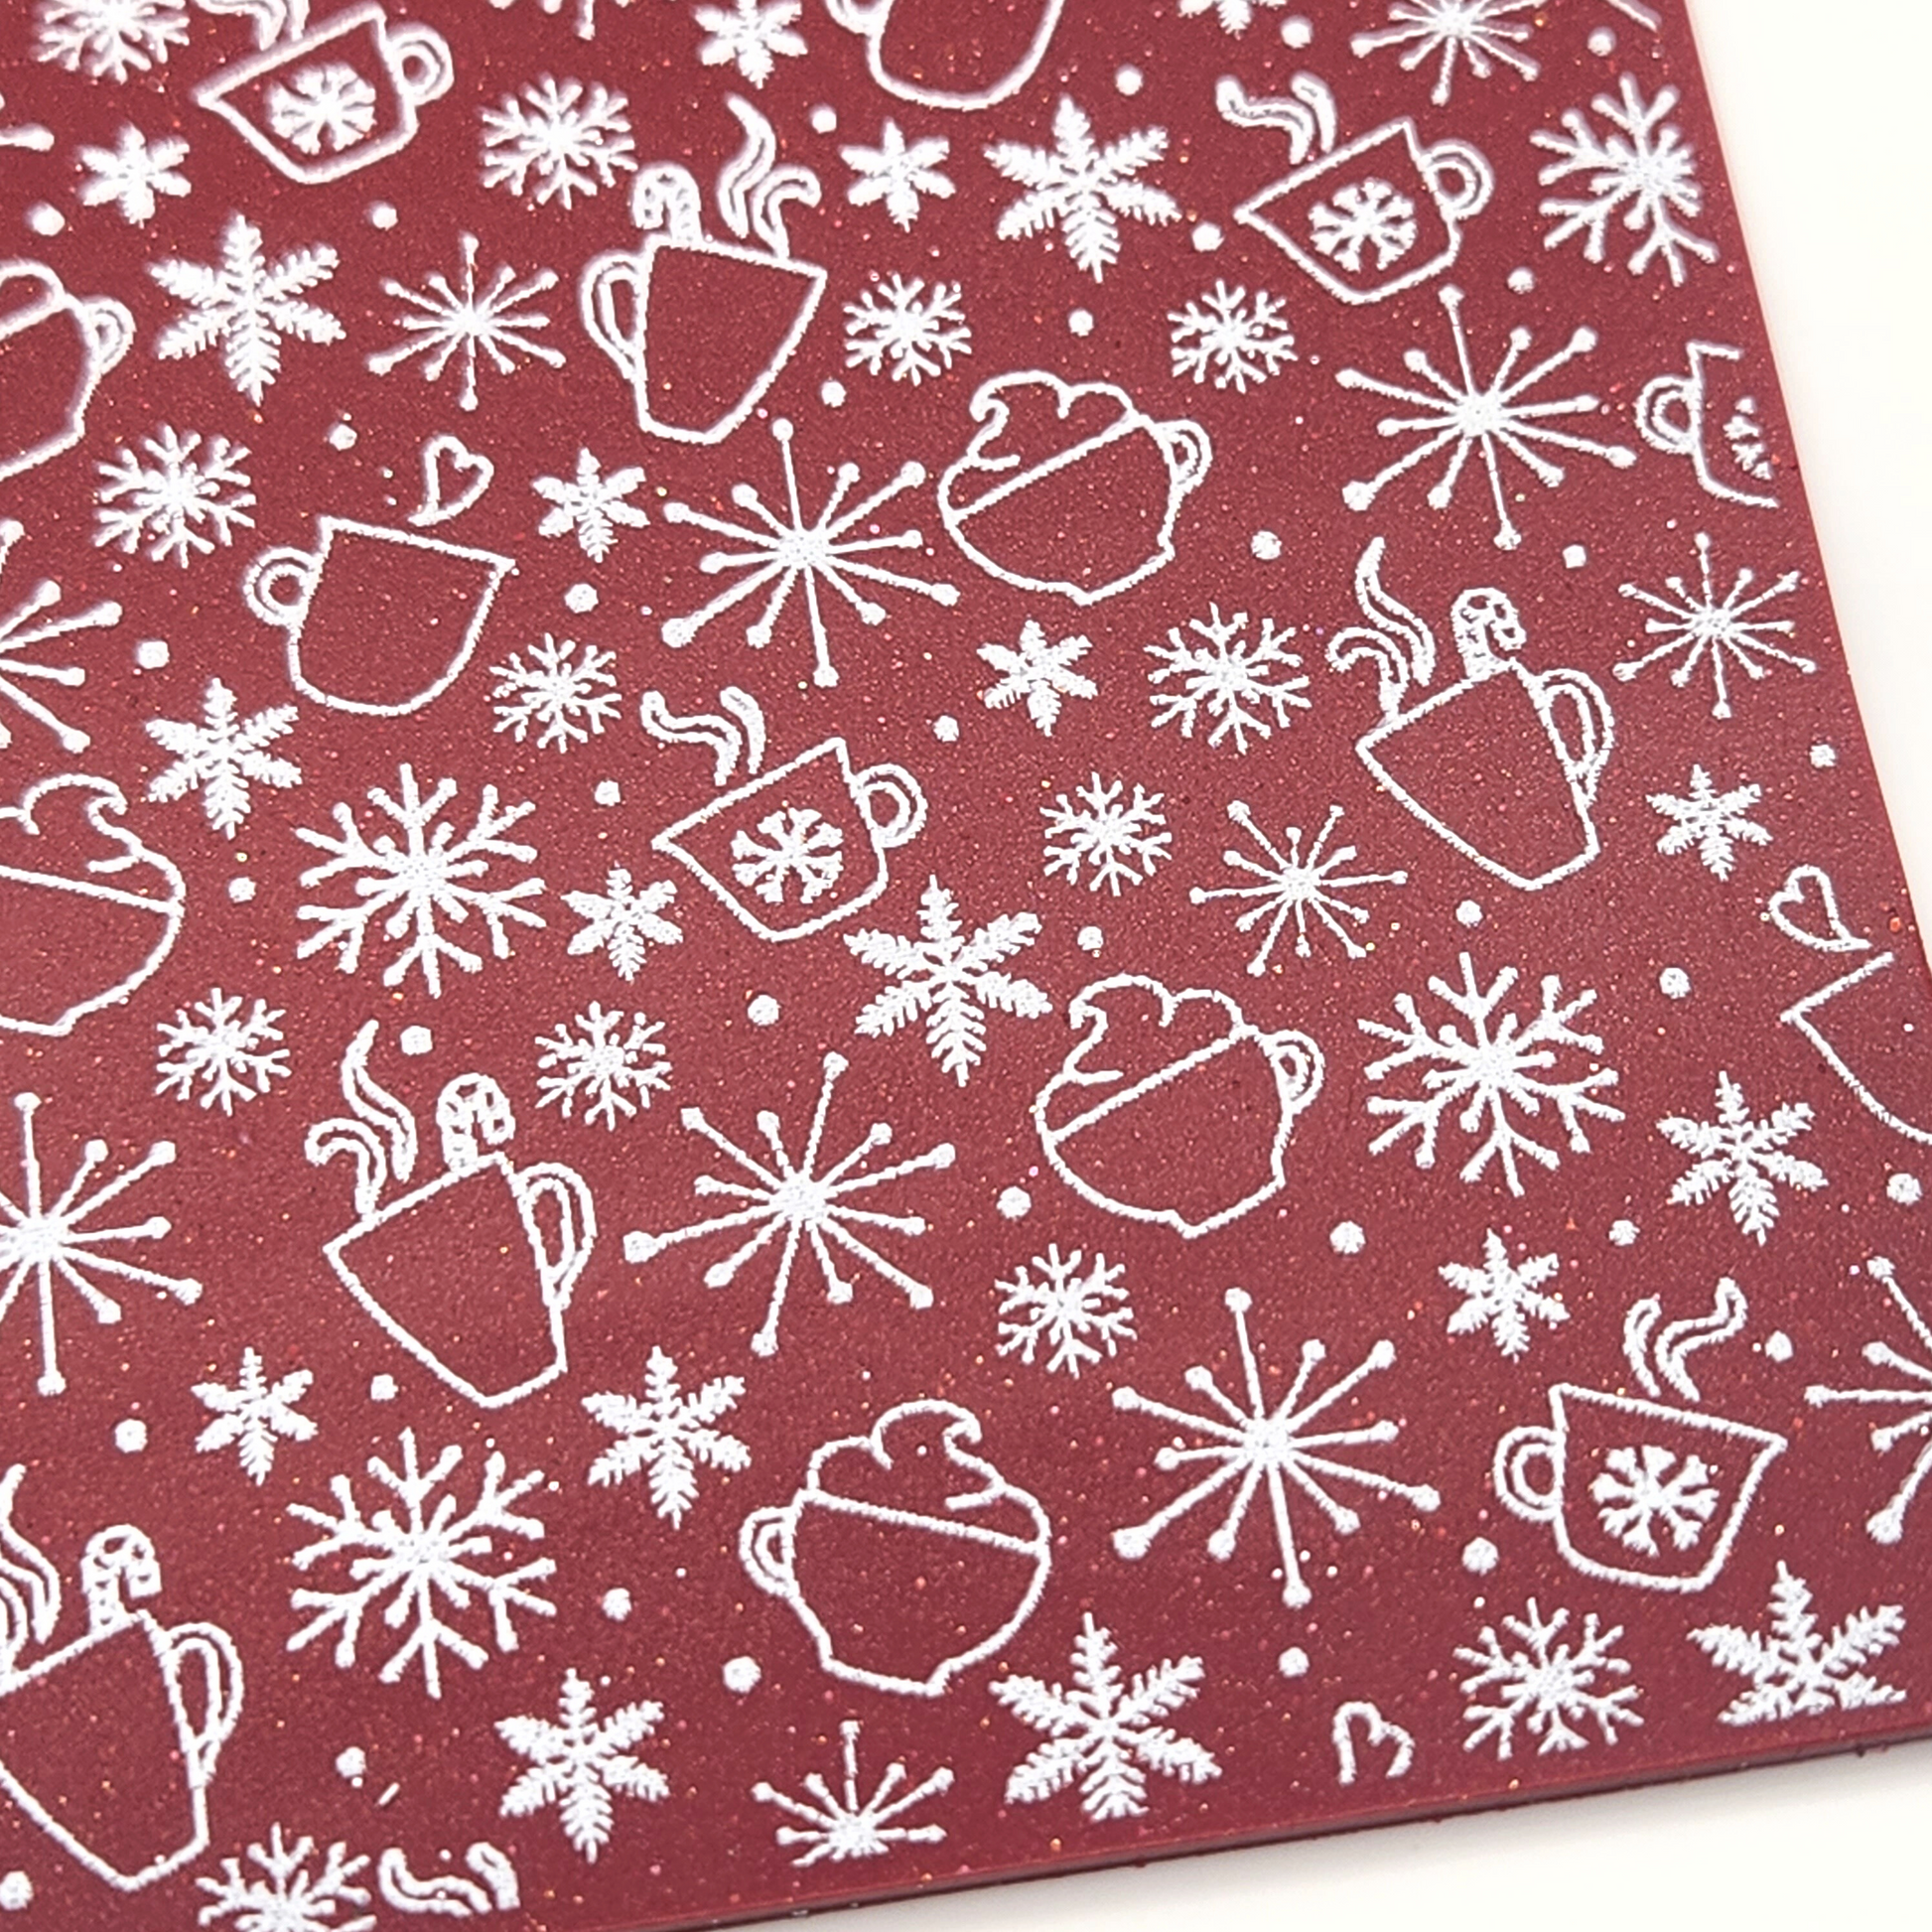 Showing details of Cold Weather Cocoa silkscreen pattern on actual polymer clay slab